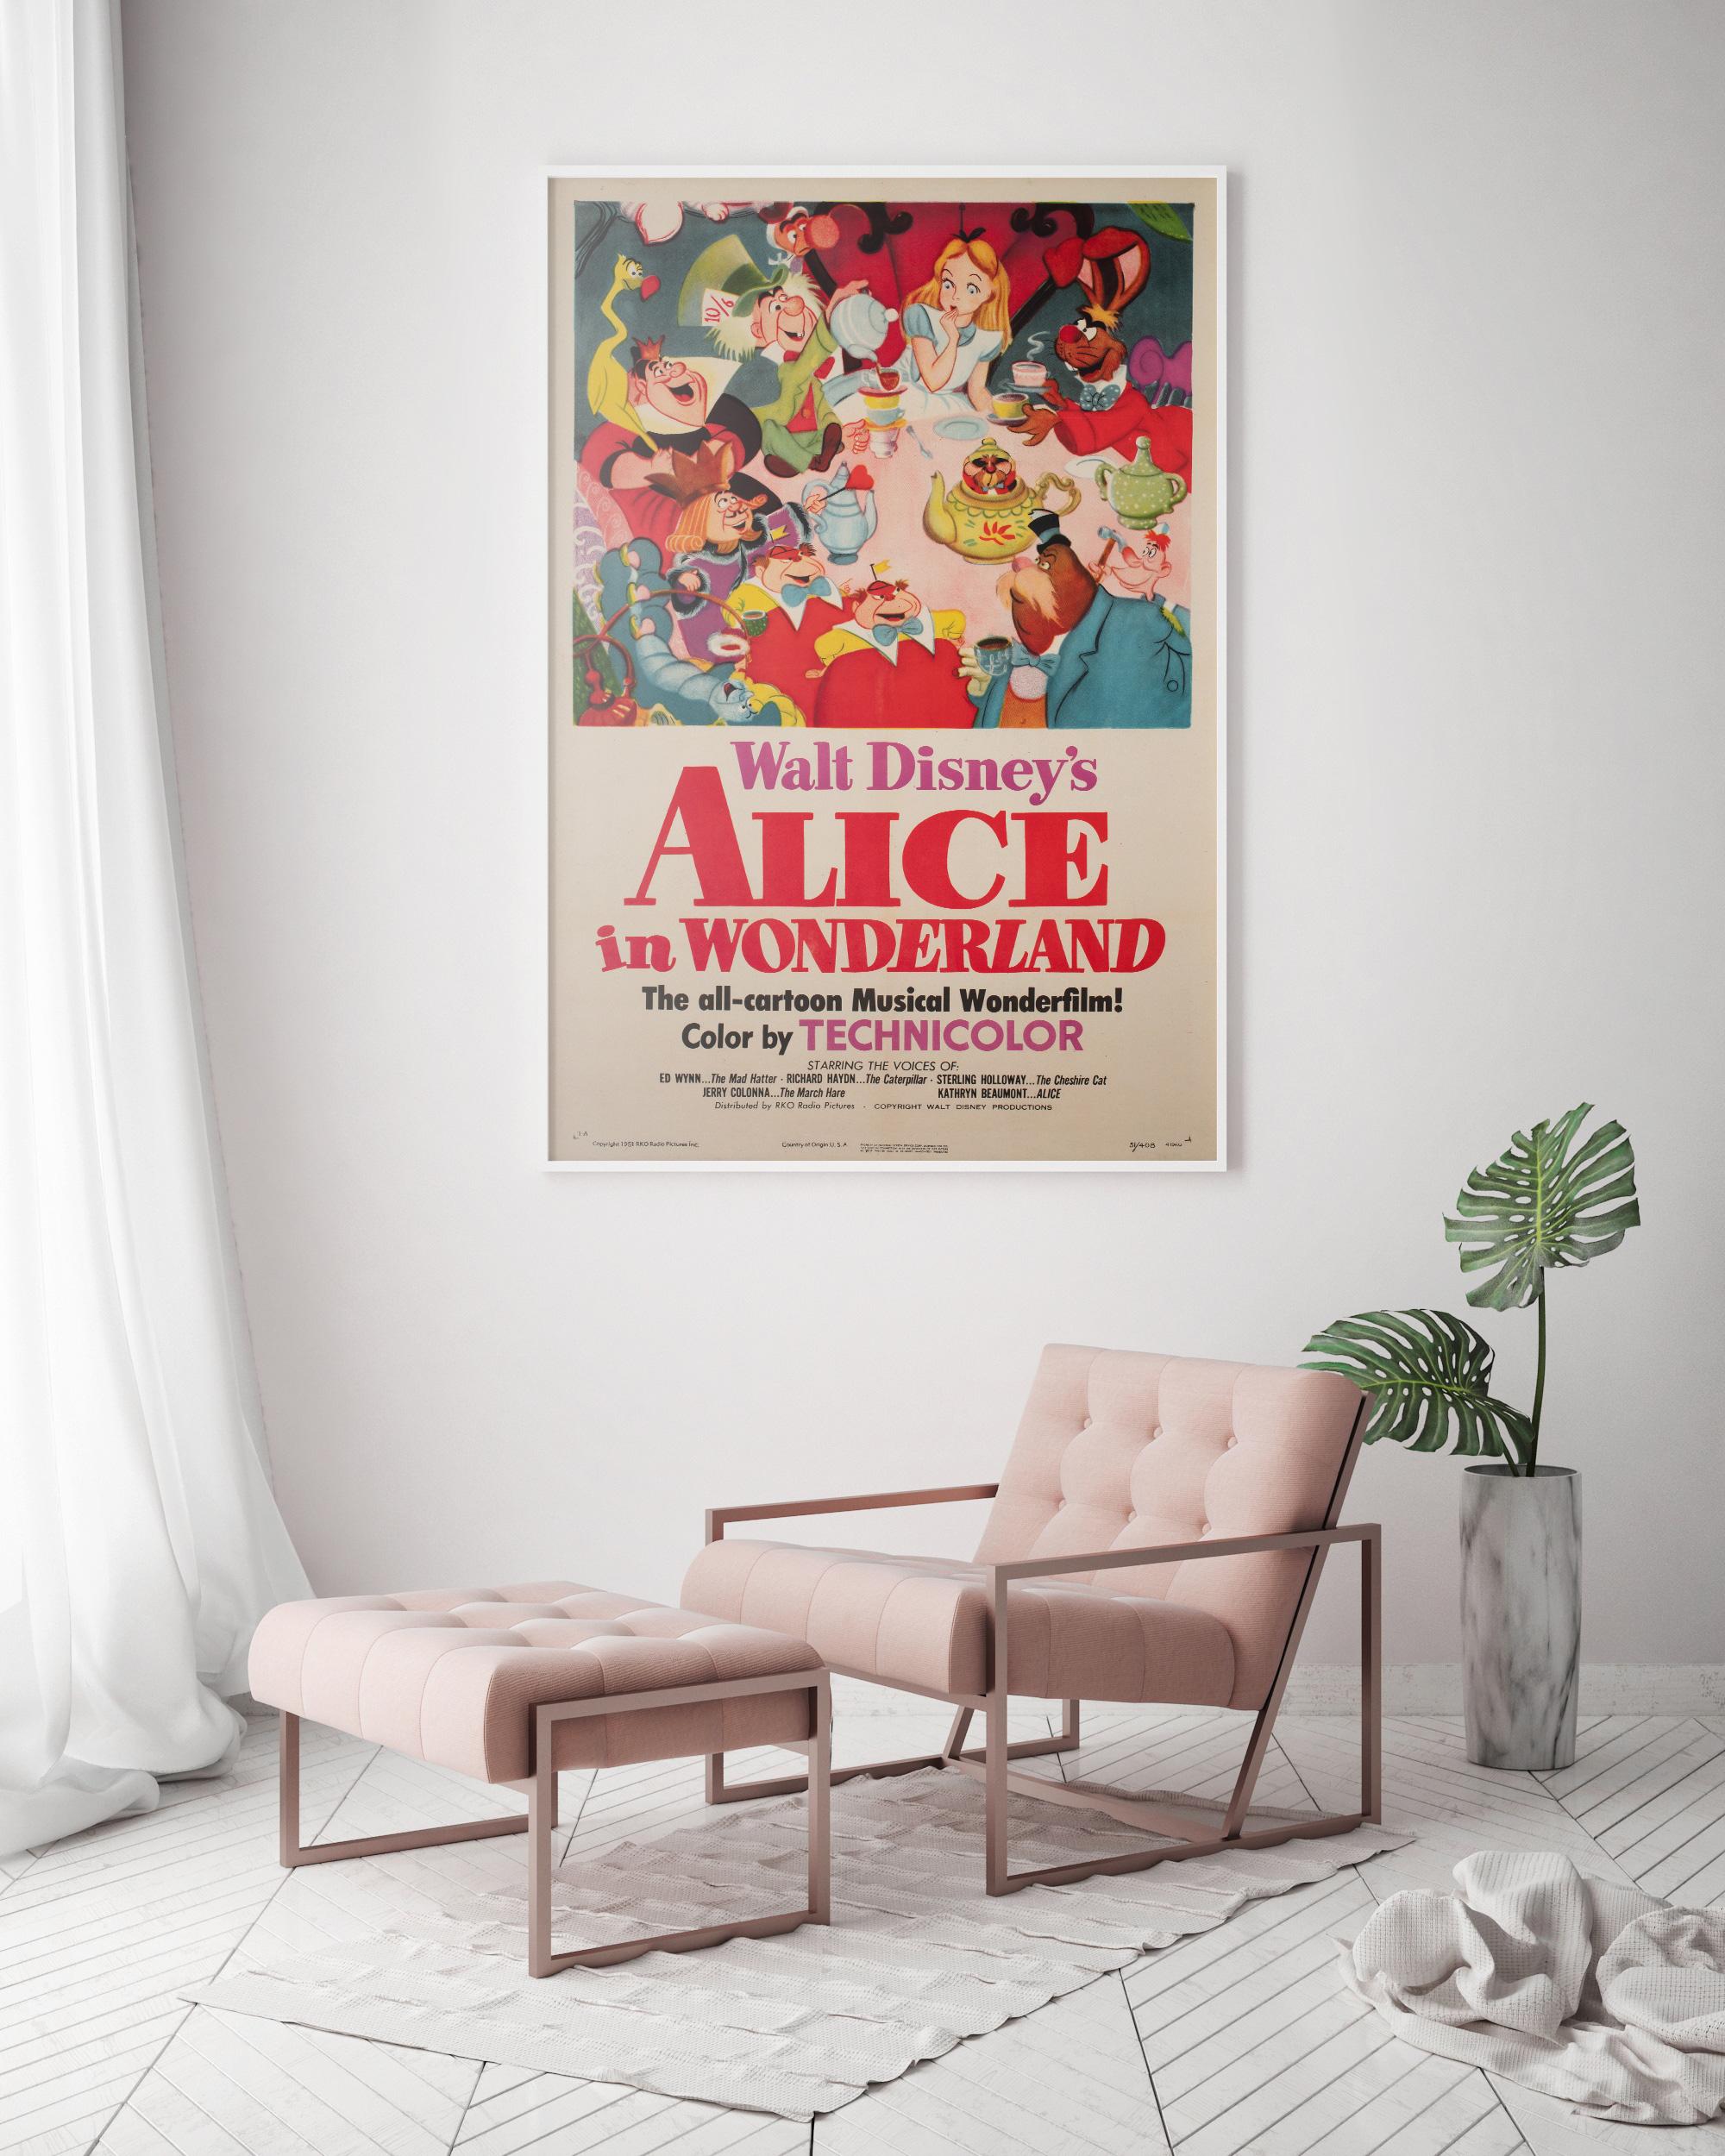 Very rare and special country-of-origin first-year-of-release US poster for Disney’s Classic rabbit hole romp Alice in Wonderland. Simply charming.

Professionally cleaned, de-acidified and linen-backed. This vintage movie poster is sized 27 3/8 x